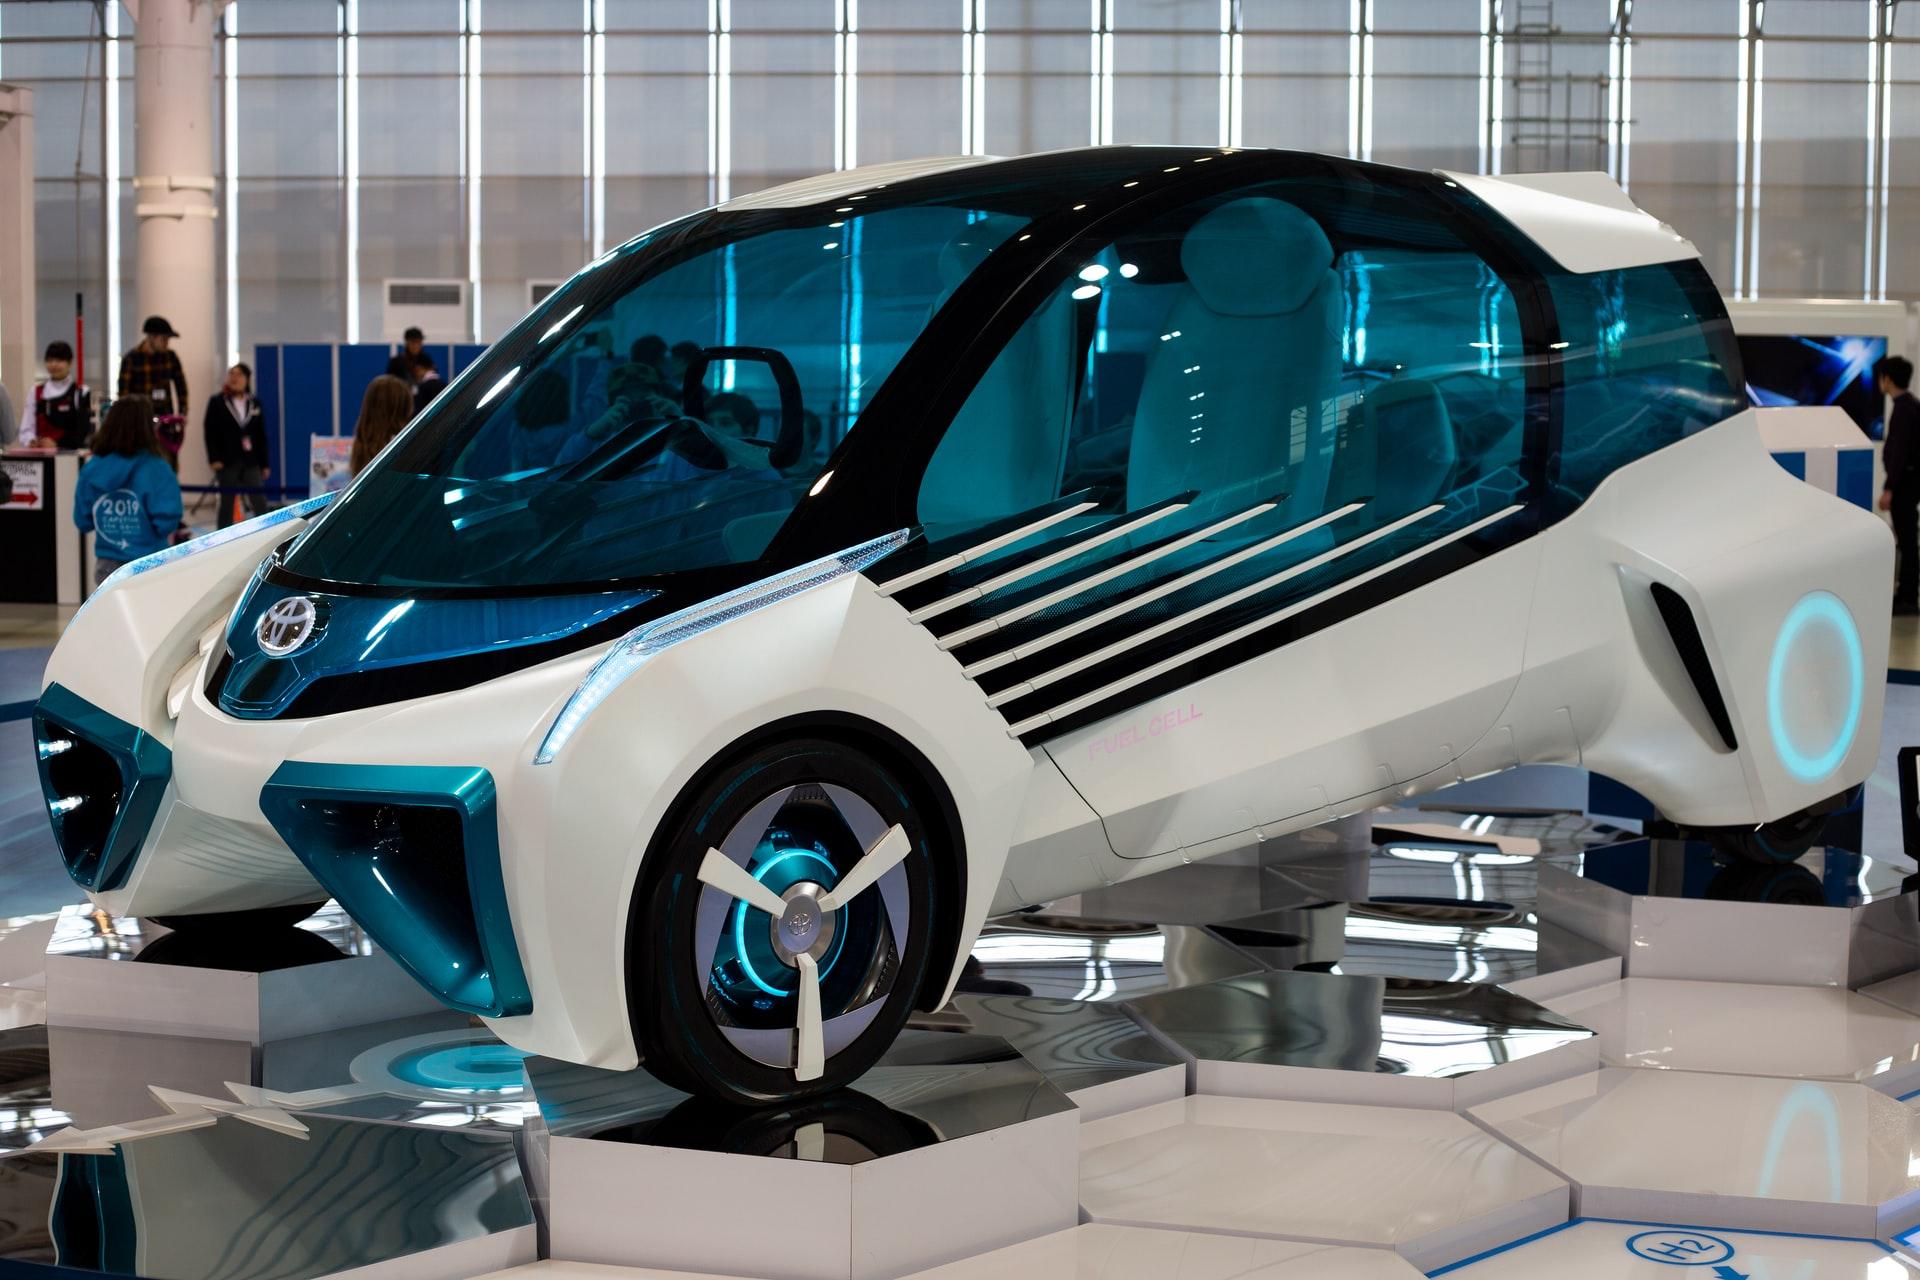 How could hydrogen fuel cell vehicles impact our future?